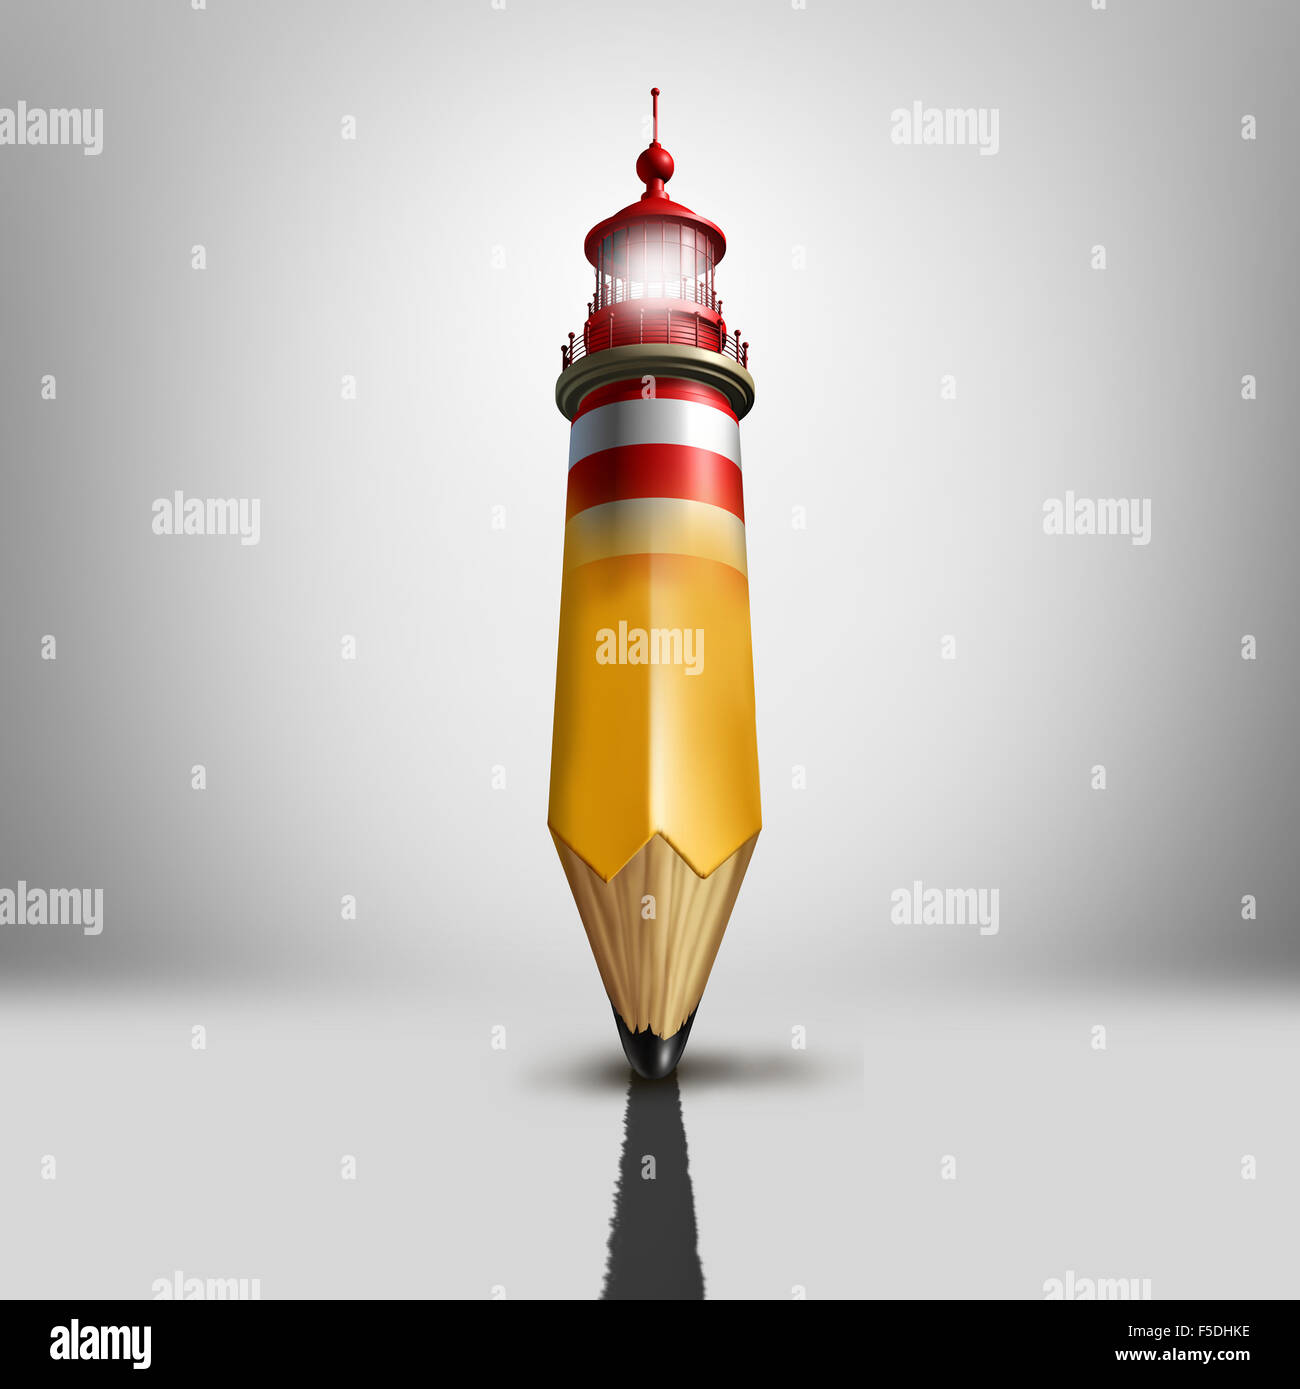 Guidance planning concept and plotting a course symbol as a metaphor for business advice anf financial direction navigation as a pencil shaped as a light house or lighthouse beacon showing the way to success. Stock Photo